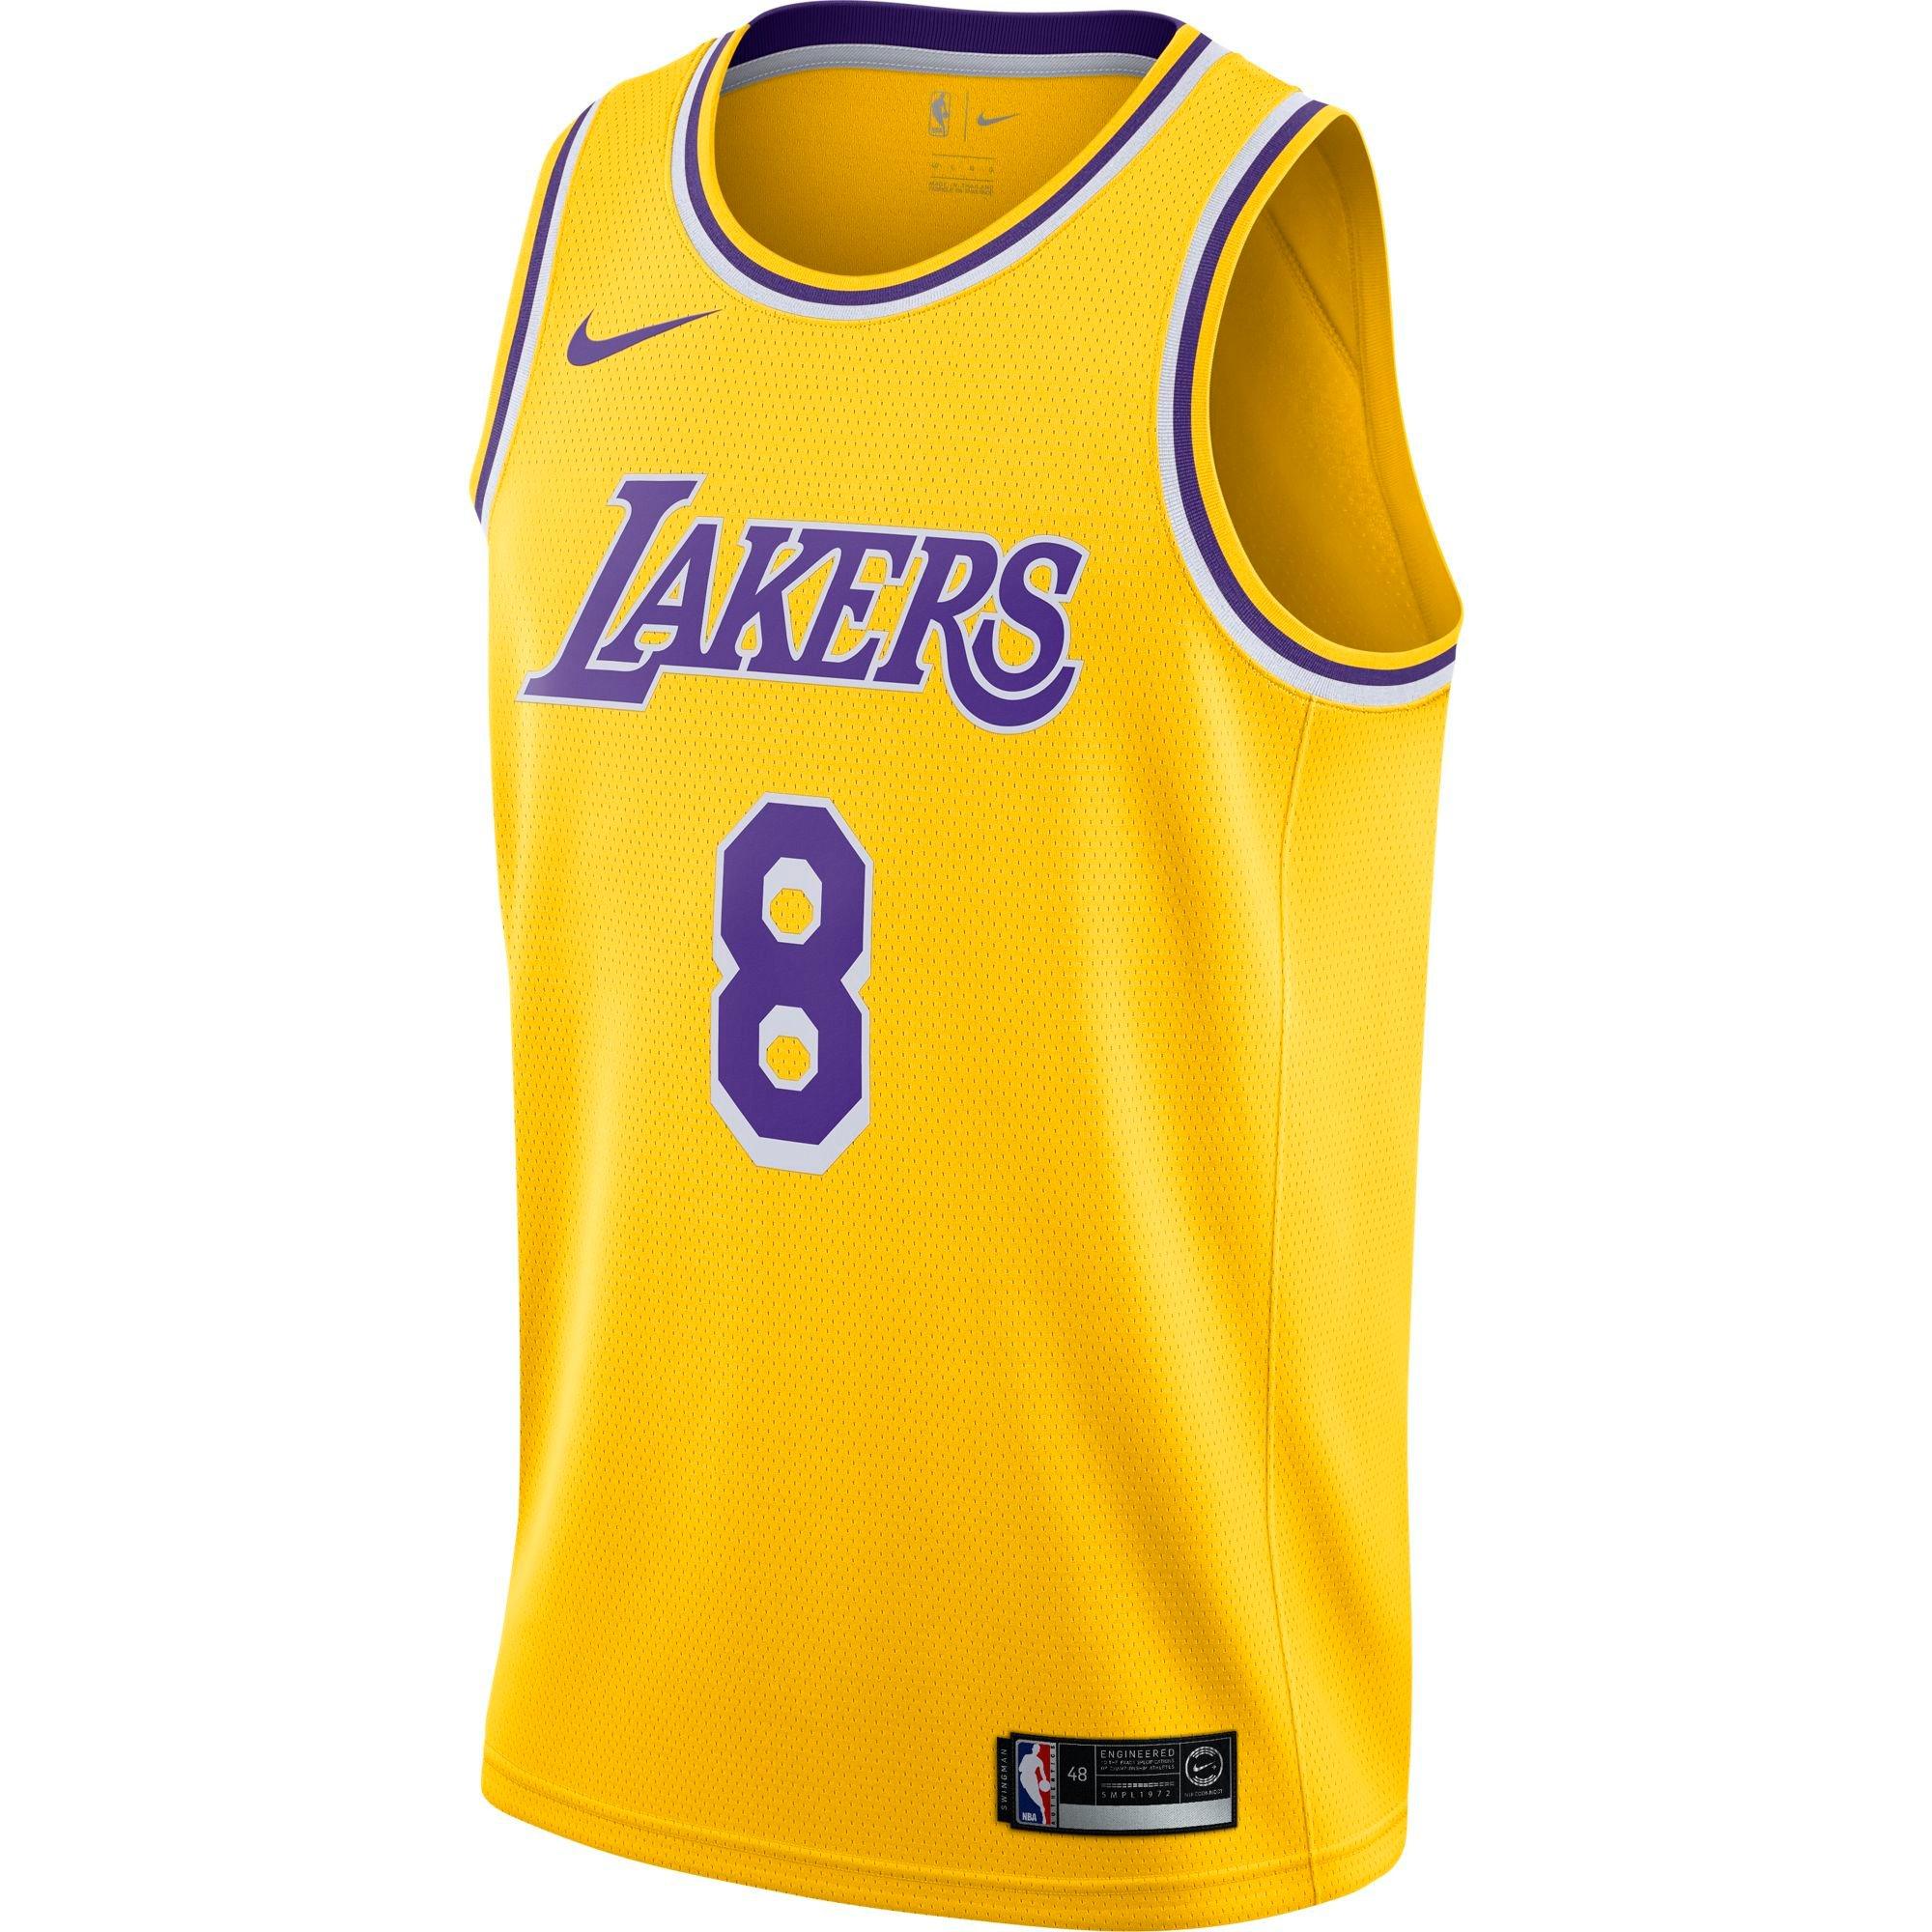 jersey 8 lakers